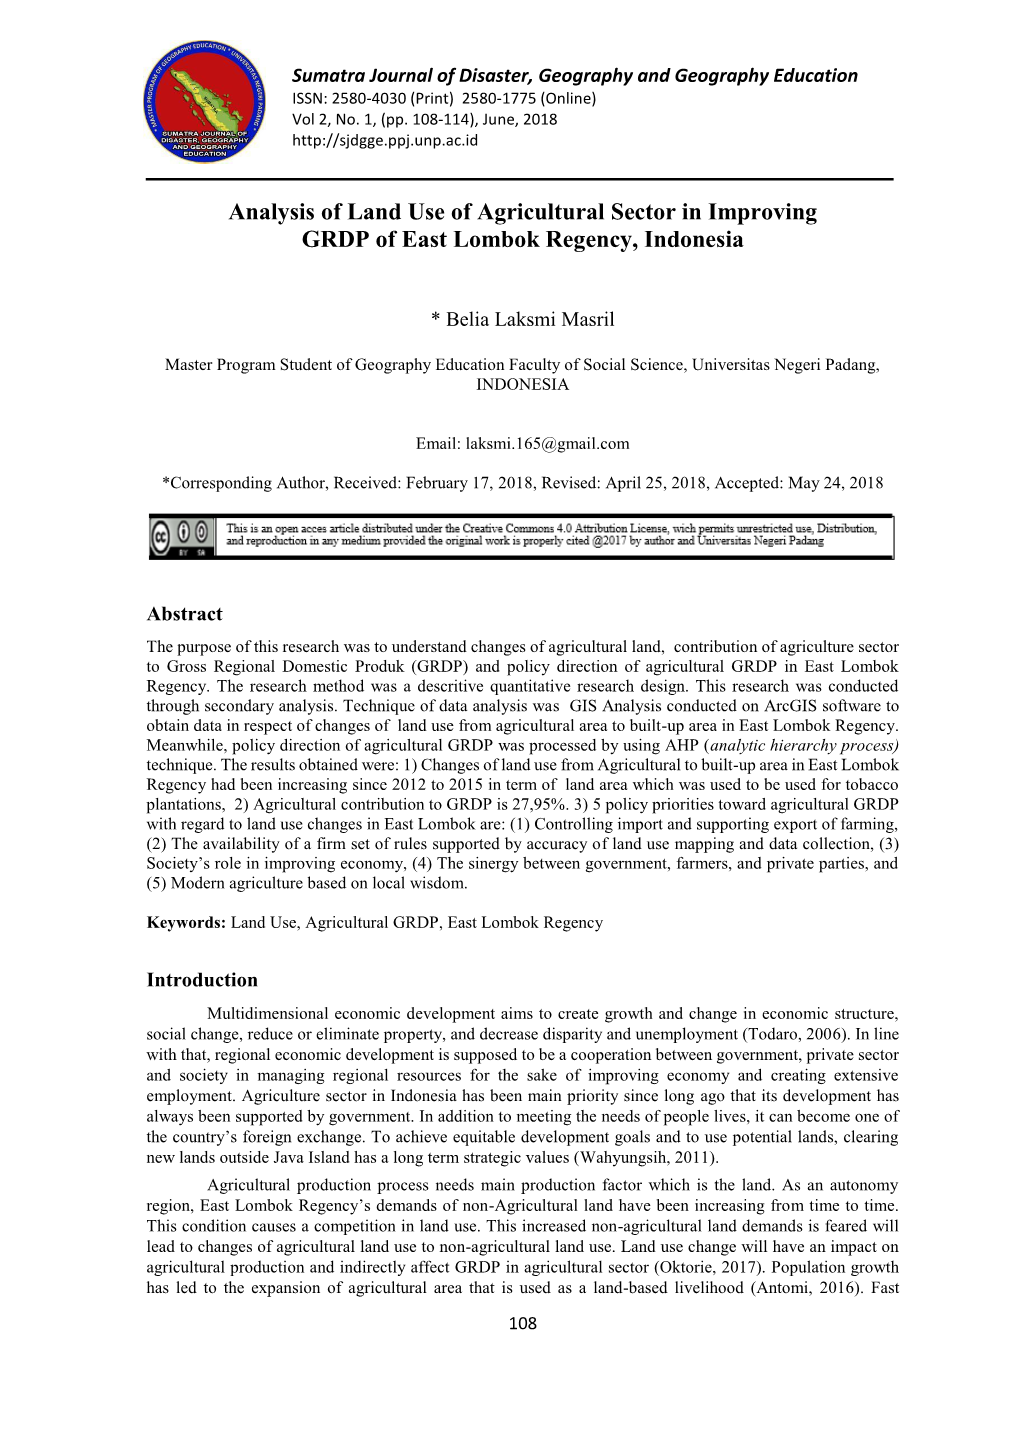 Analysis of Land Use of Agricultural Sector in Improving GRDP of East Lombok Regency, Indonesia